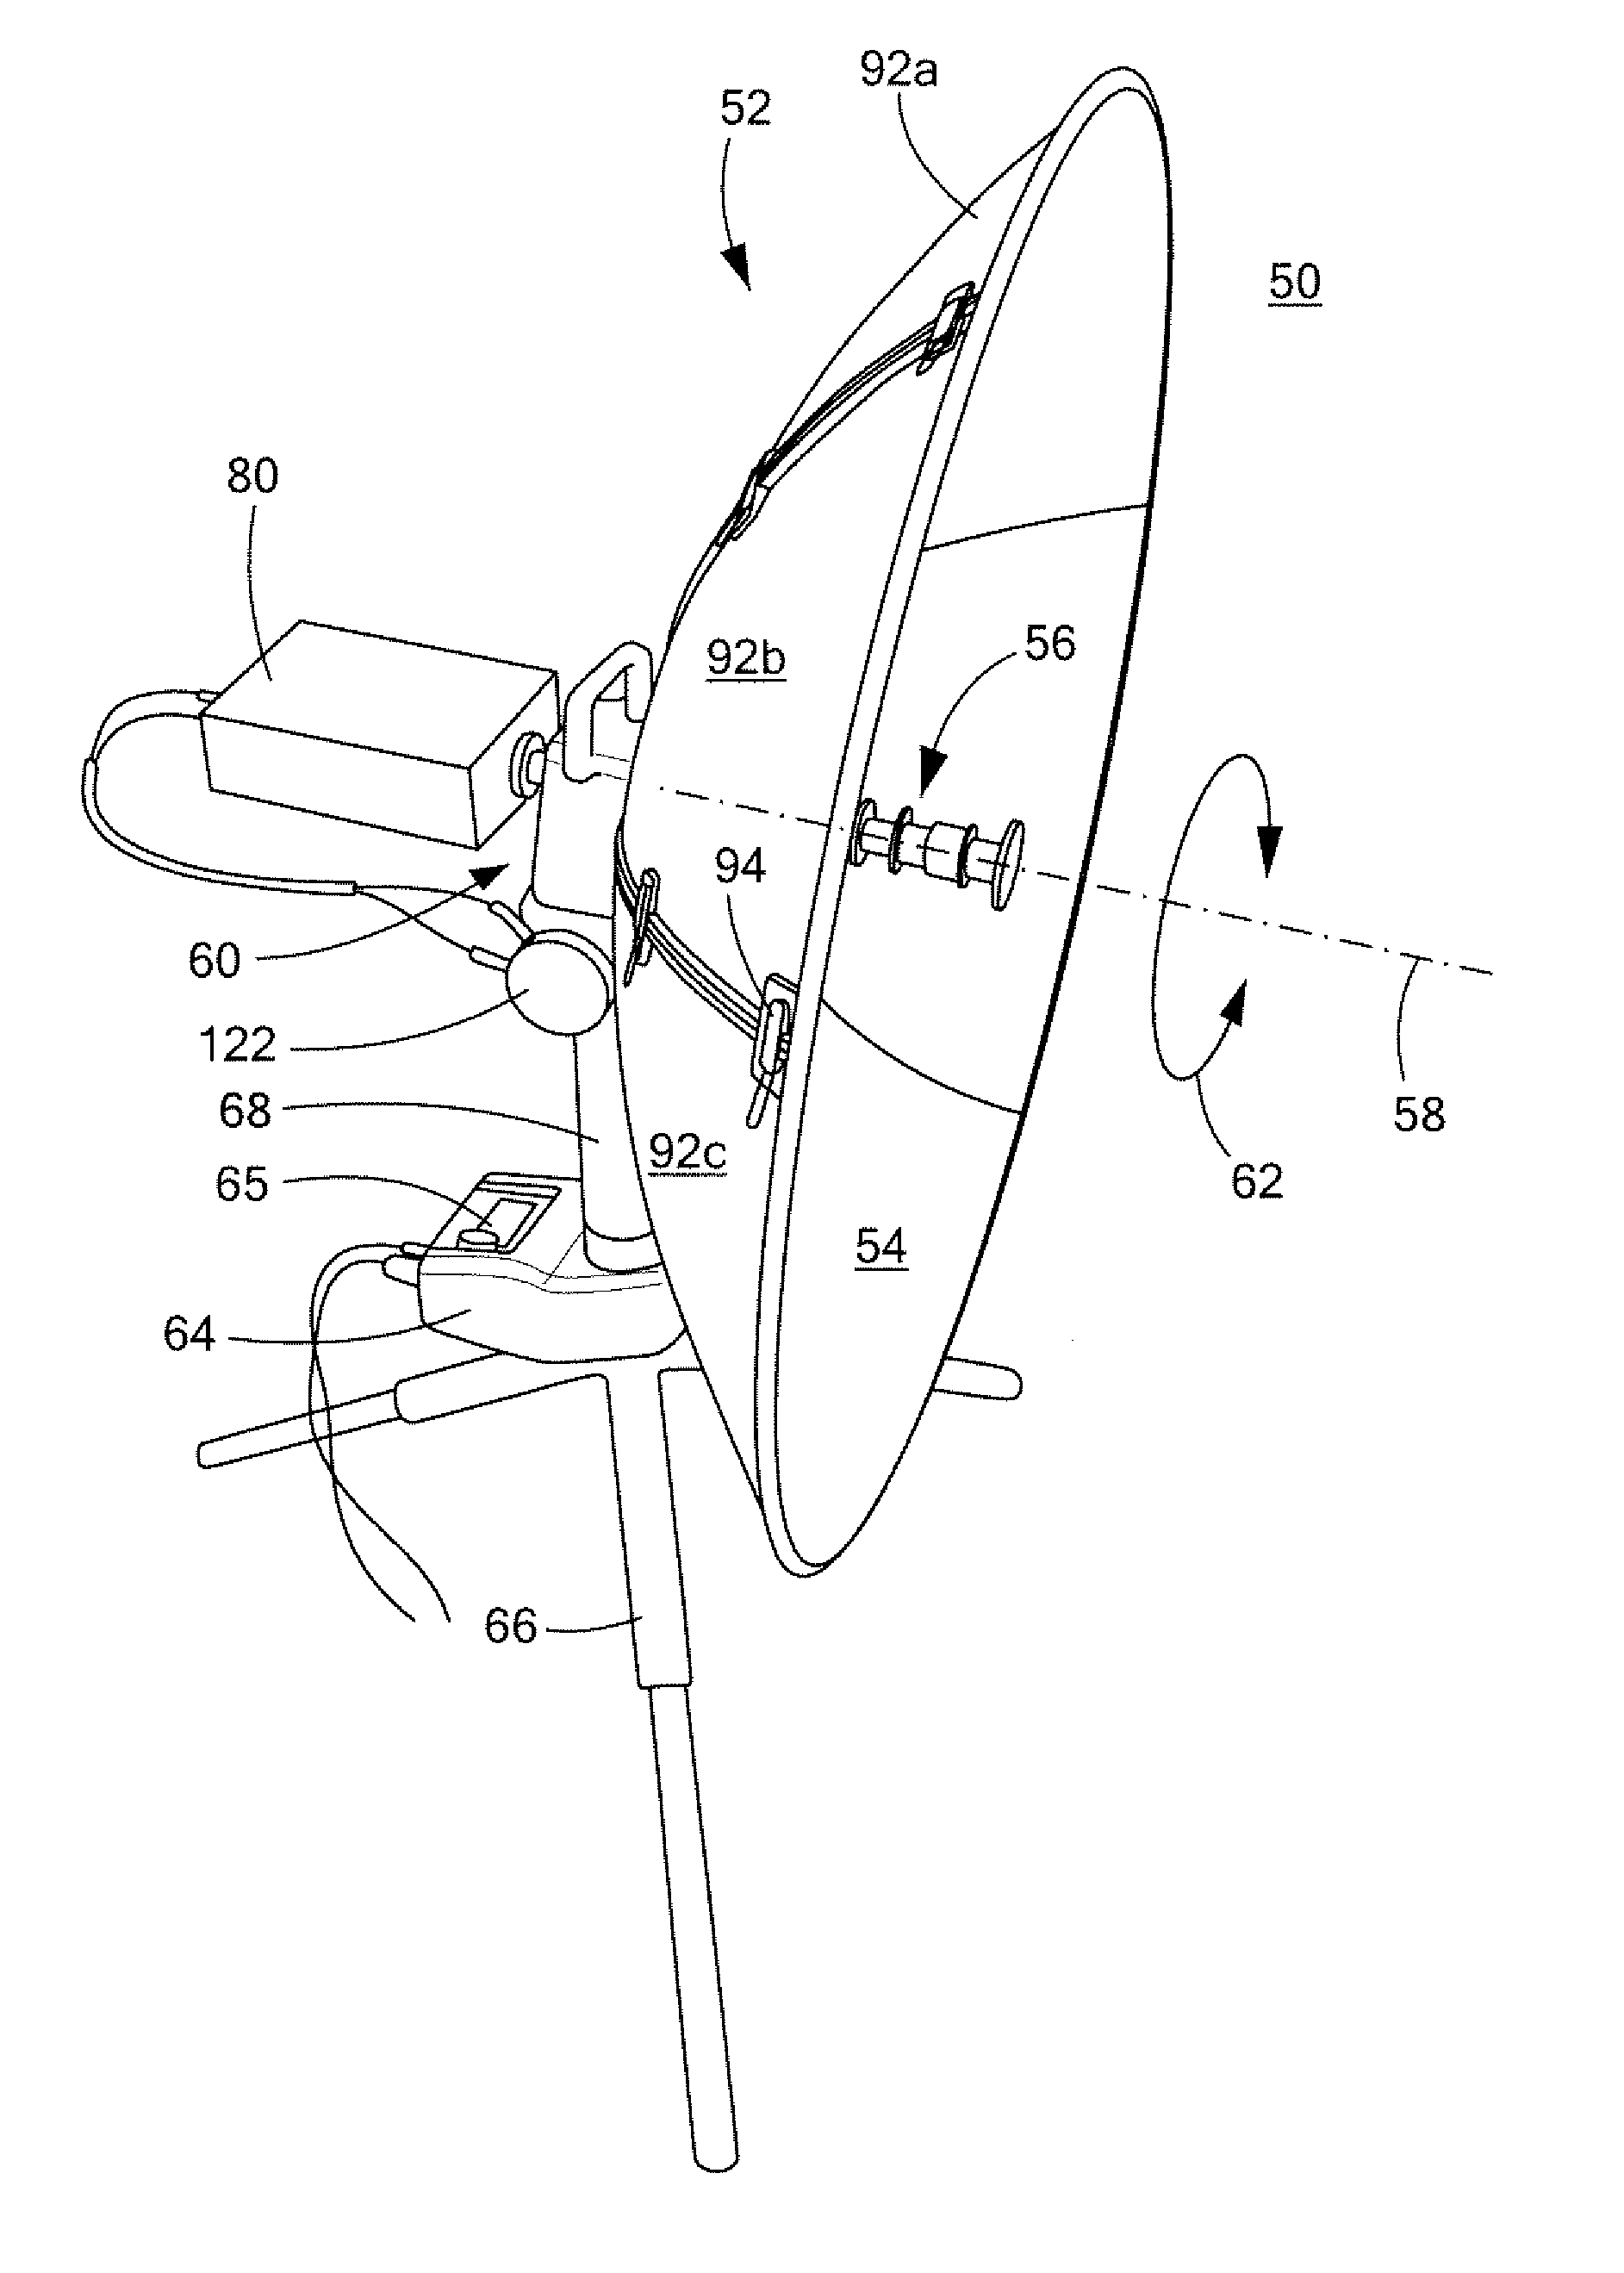 Antenna positioning system with automated skewed positioning